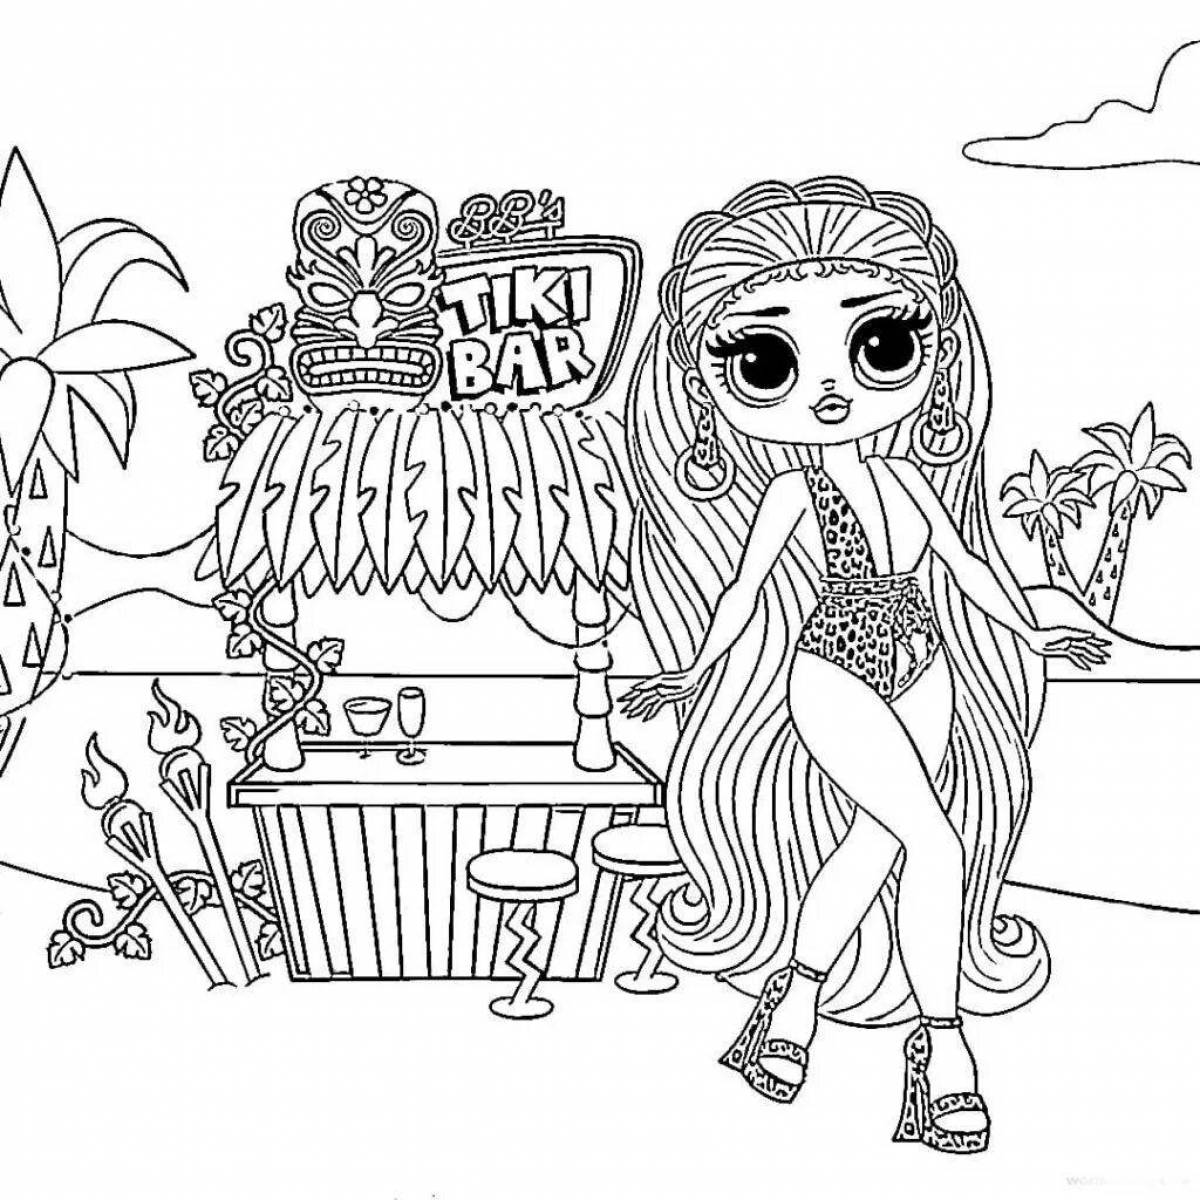 Awesome lol doll house coloring pages for girls